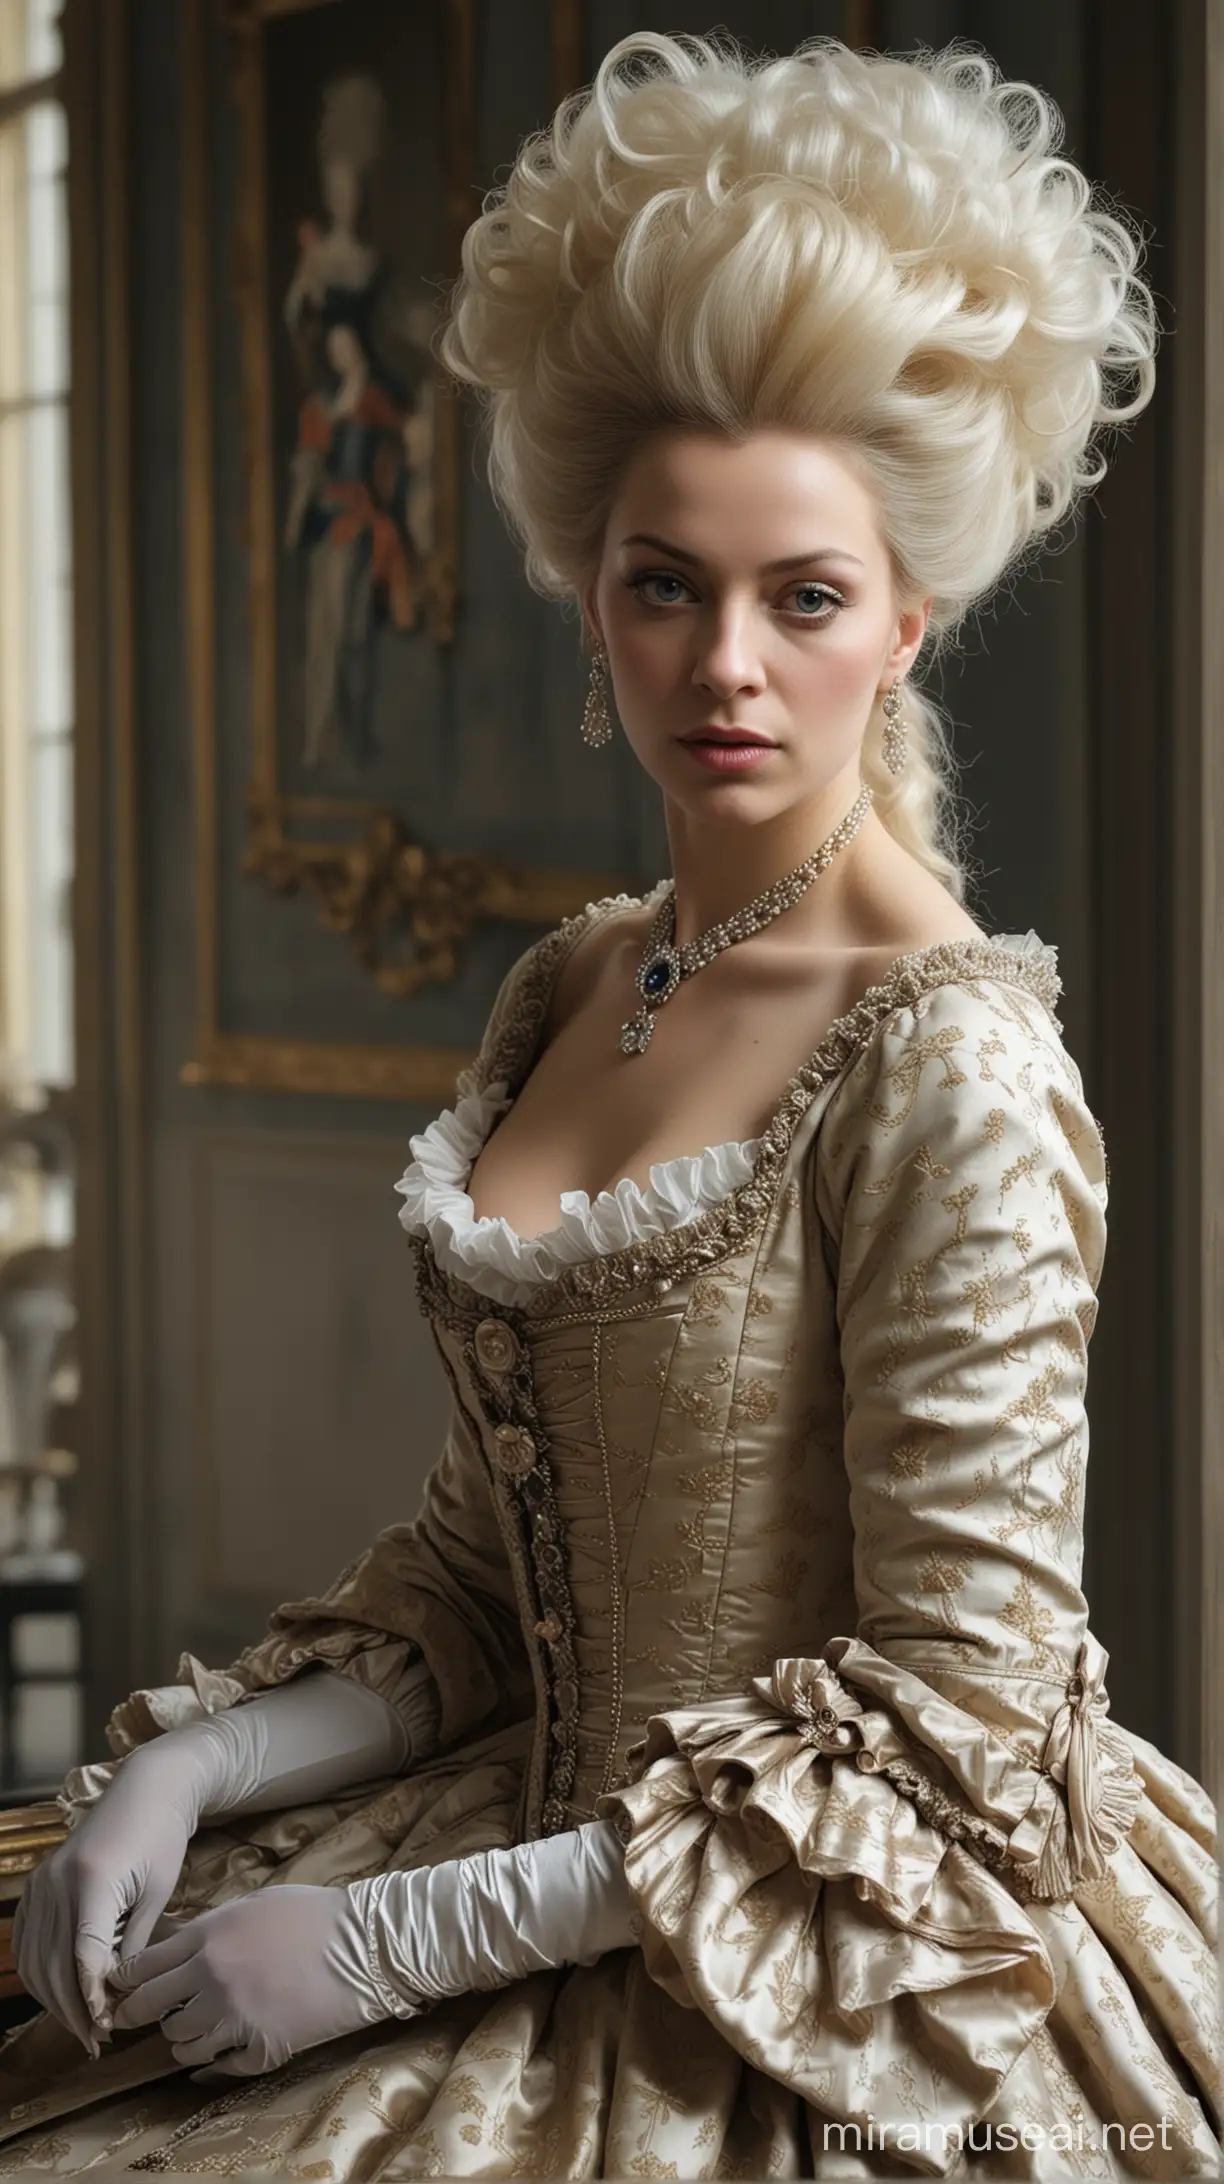 Marie Antoinette in Regal Contrast Hyper Realistic Depiction of Elegance Amidst Gritty Backdrop